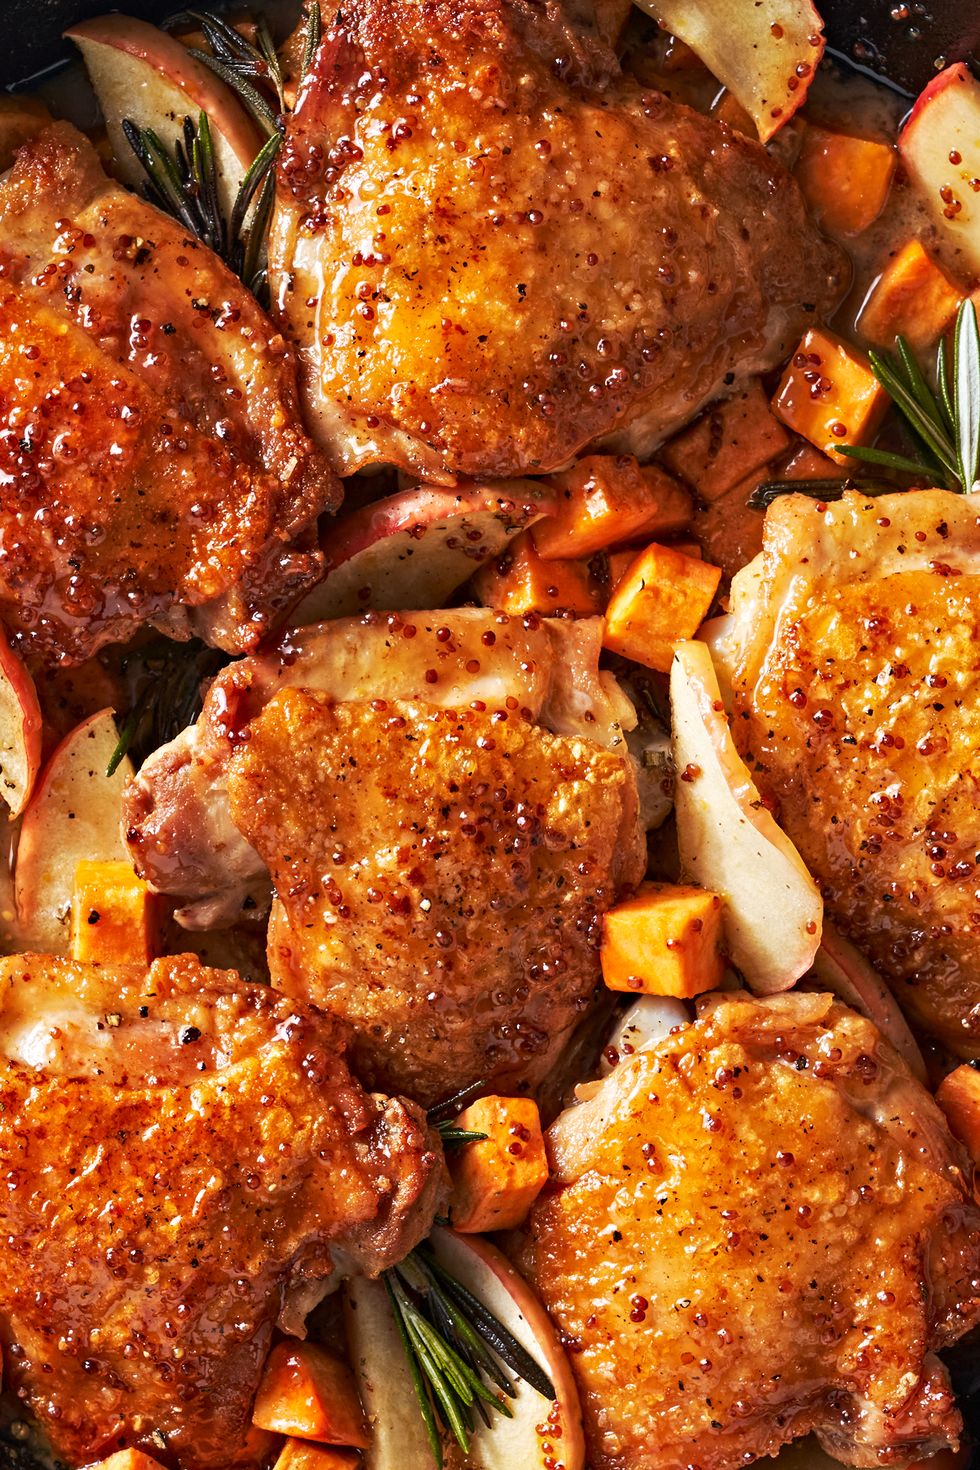 cider glazed chicken thighs with apples and sweet potatoes